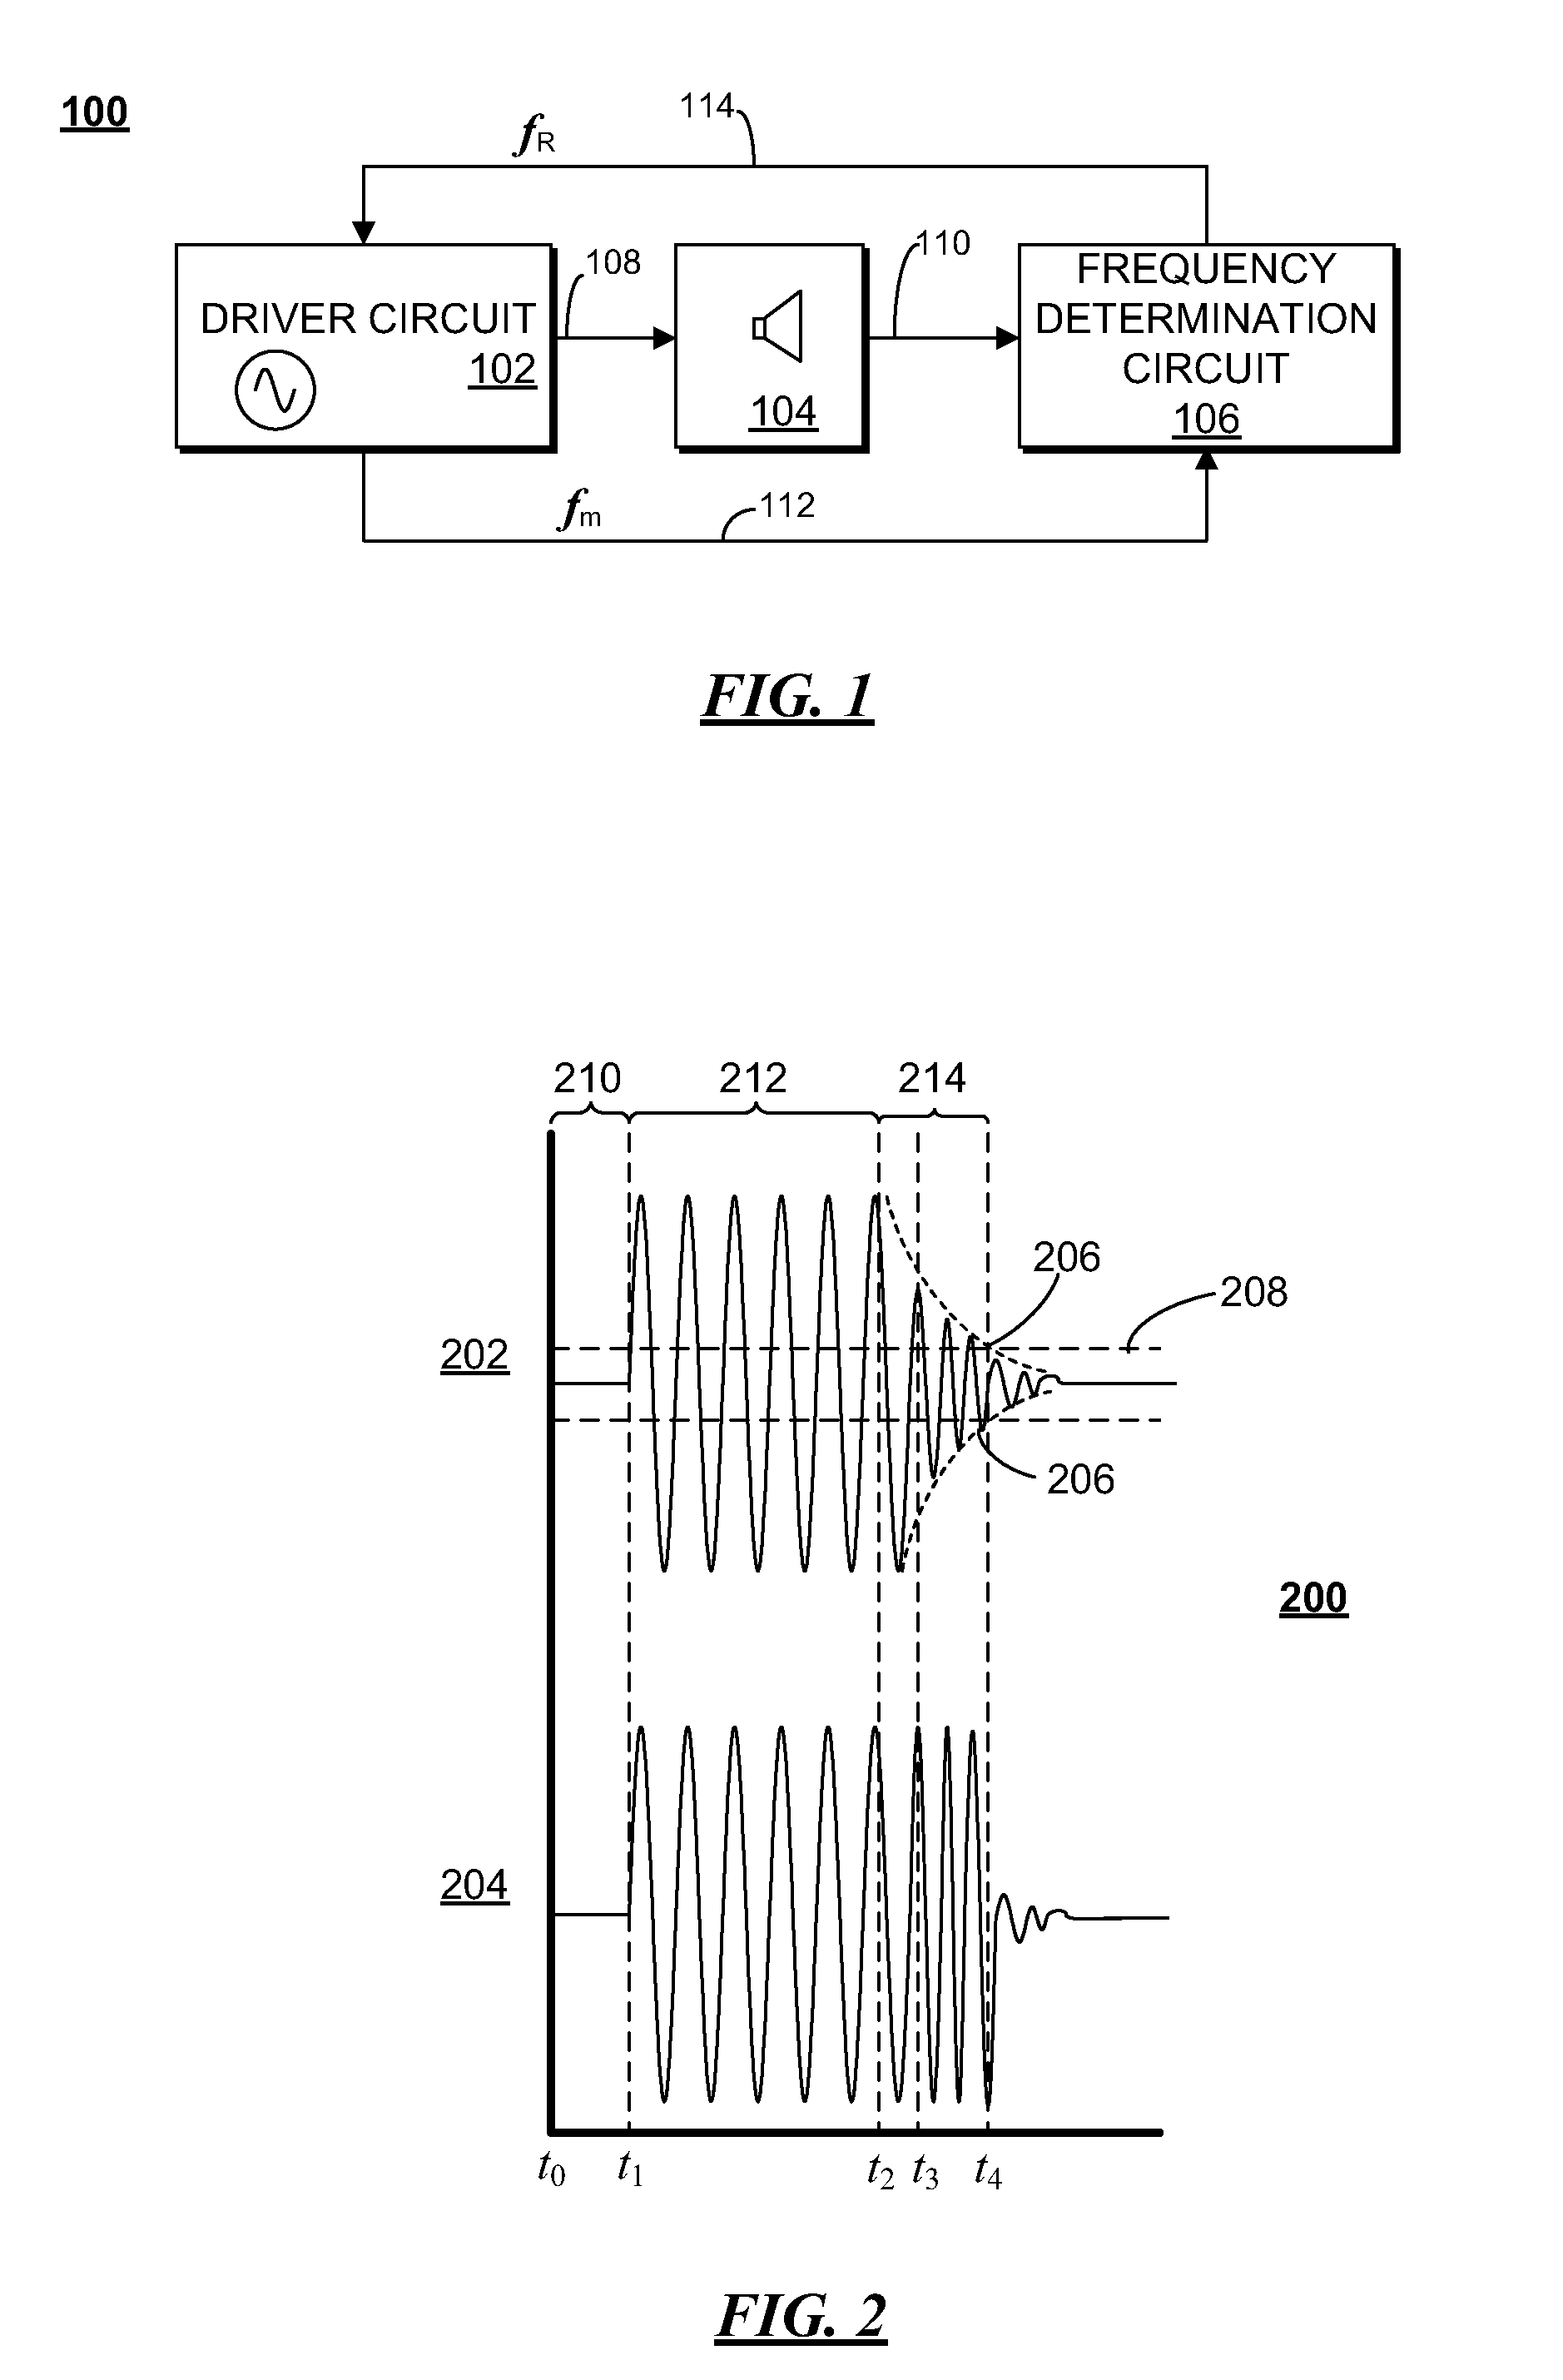 Self-tuning acoustic measurement system